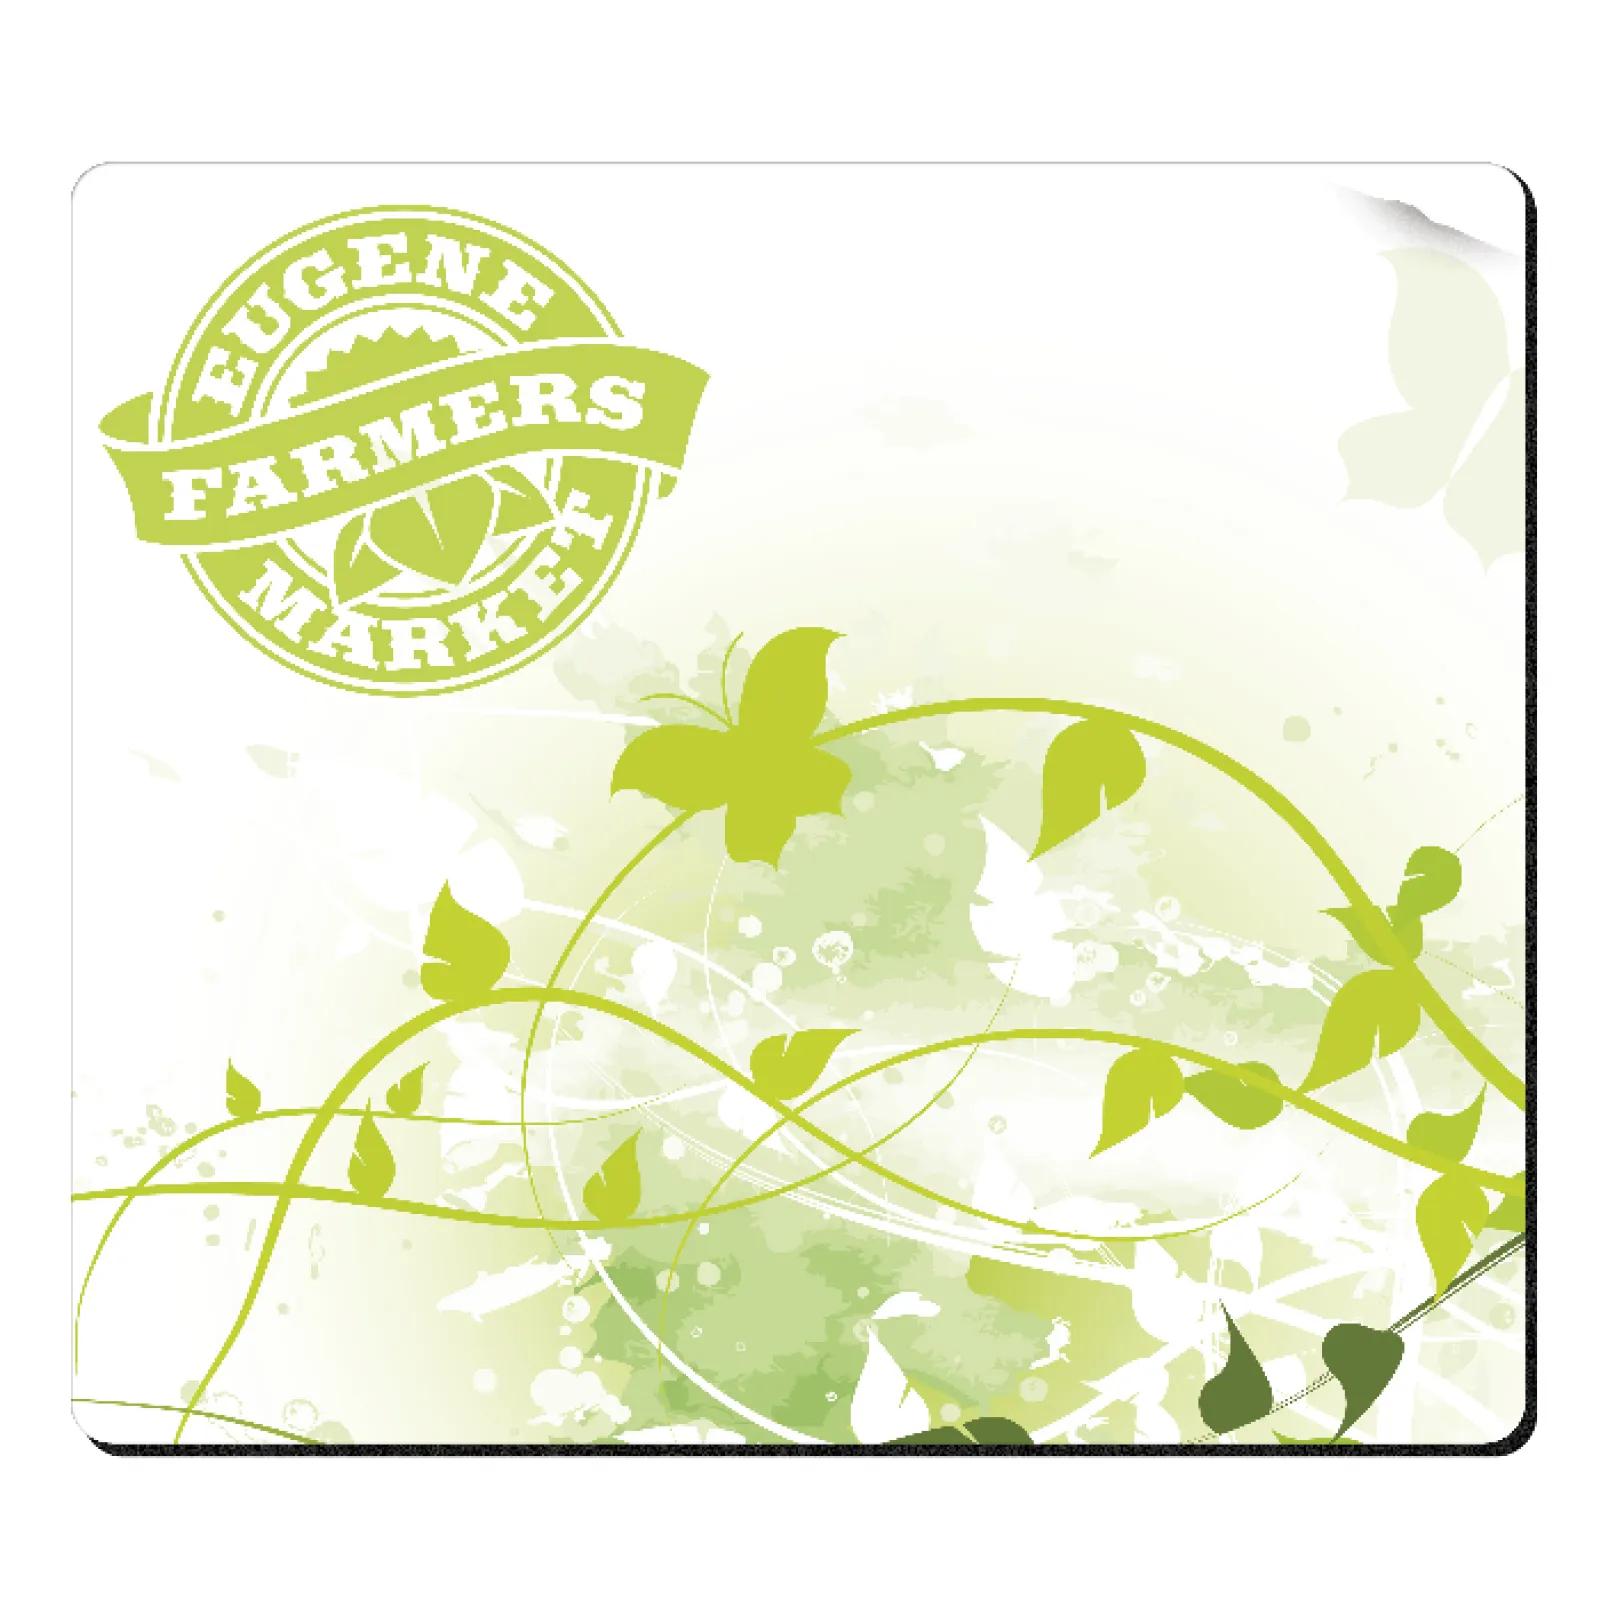 1/8" Fabric Surface Mouse Pad (7-1/2" x 8-1/2") 1 of 6